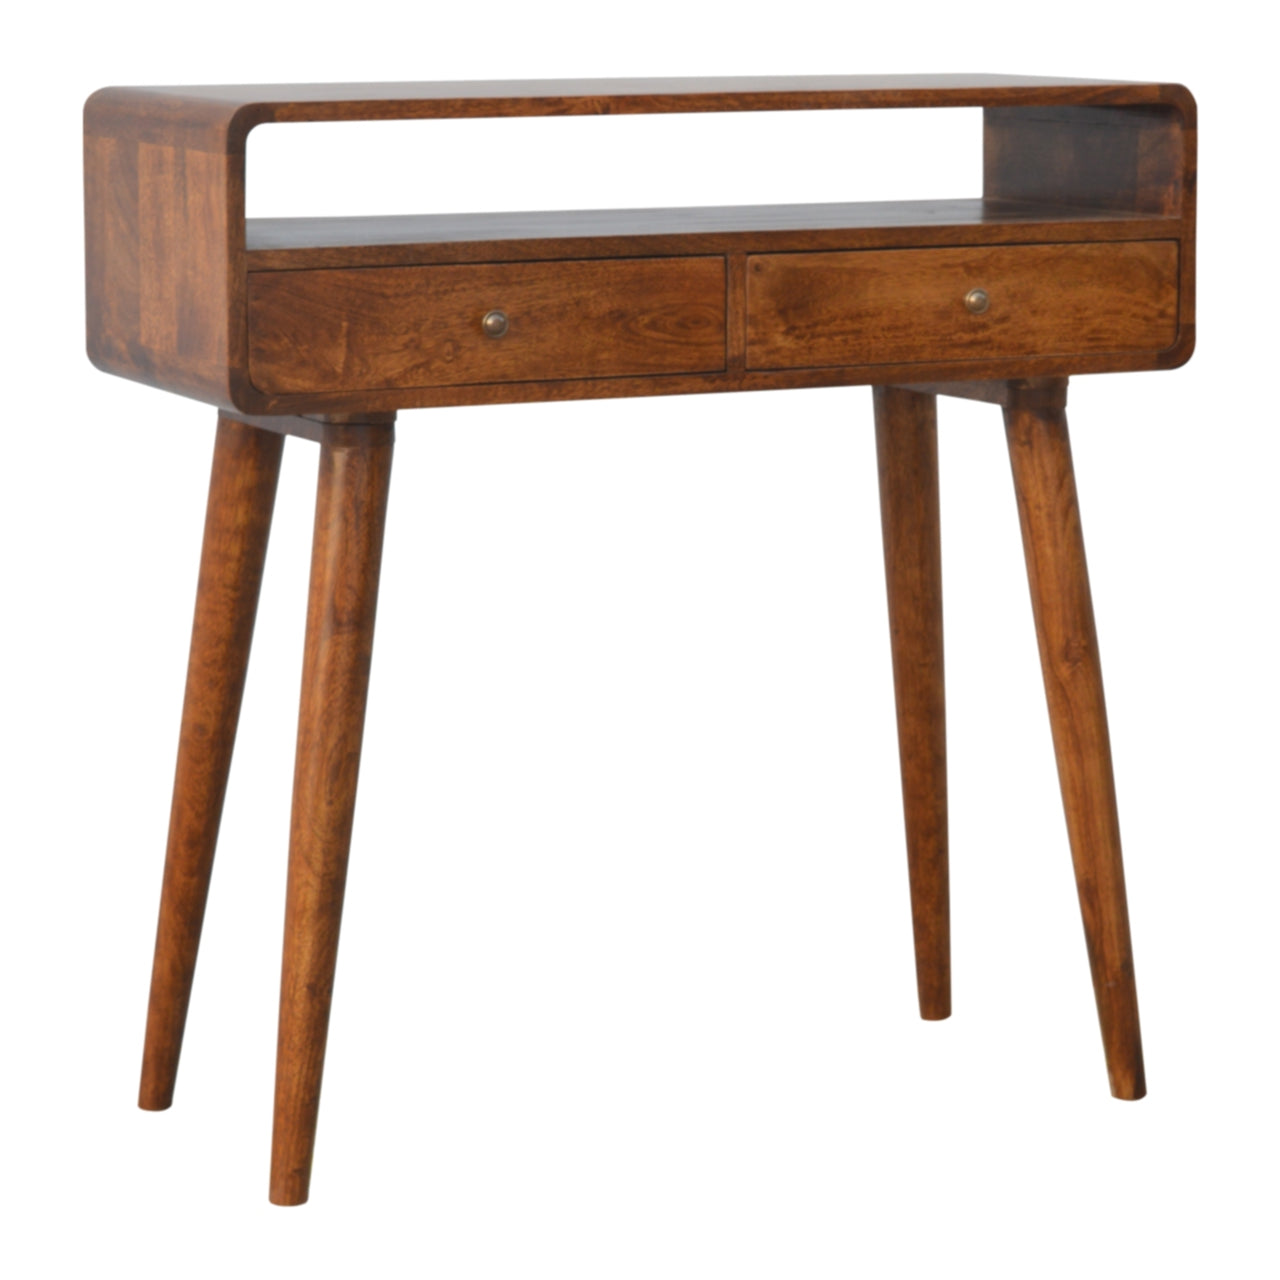 Century Handmade Solid Wood Curved Edge Slim Console Table with Drawers and an Open Storage Shelf in a Deep Chestnut Finish | malletandplane.com